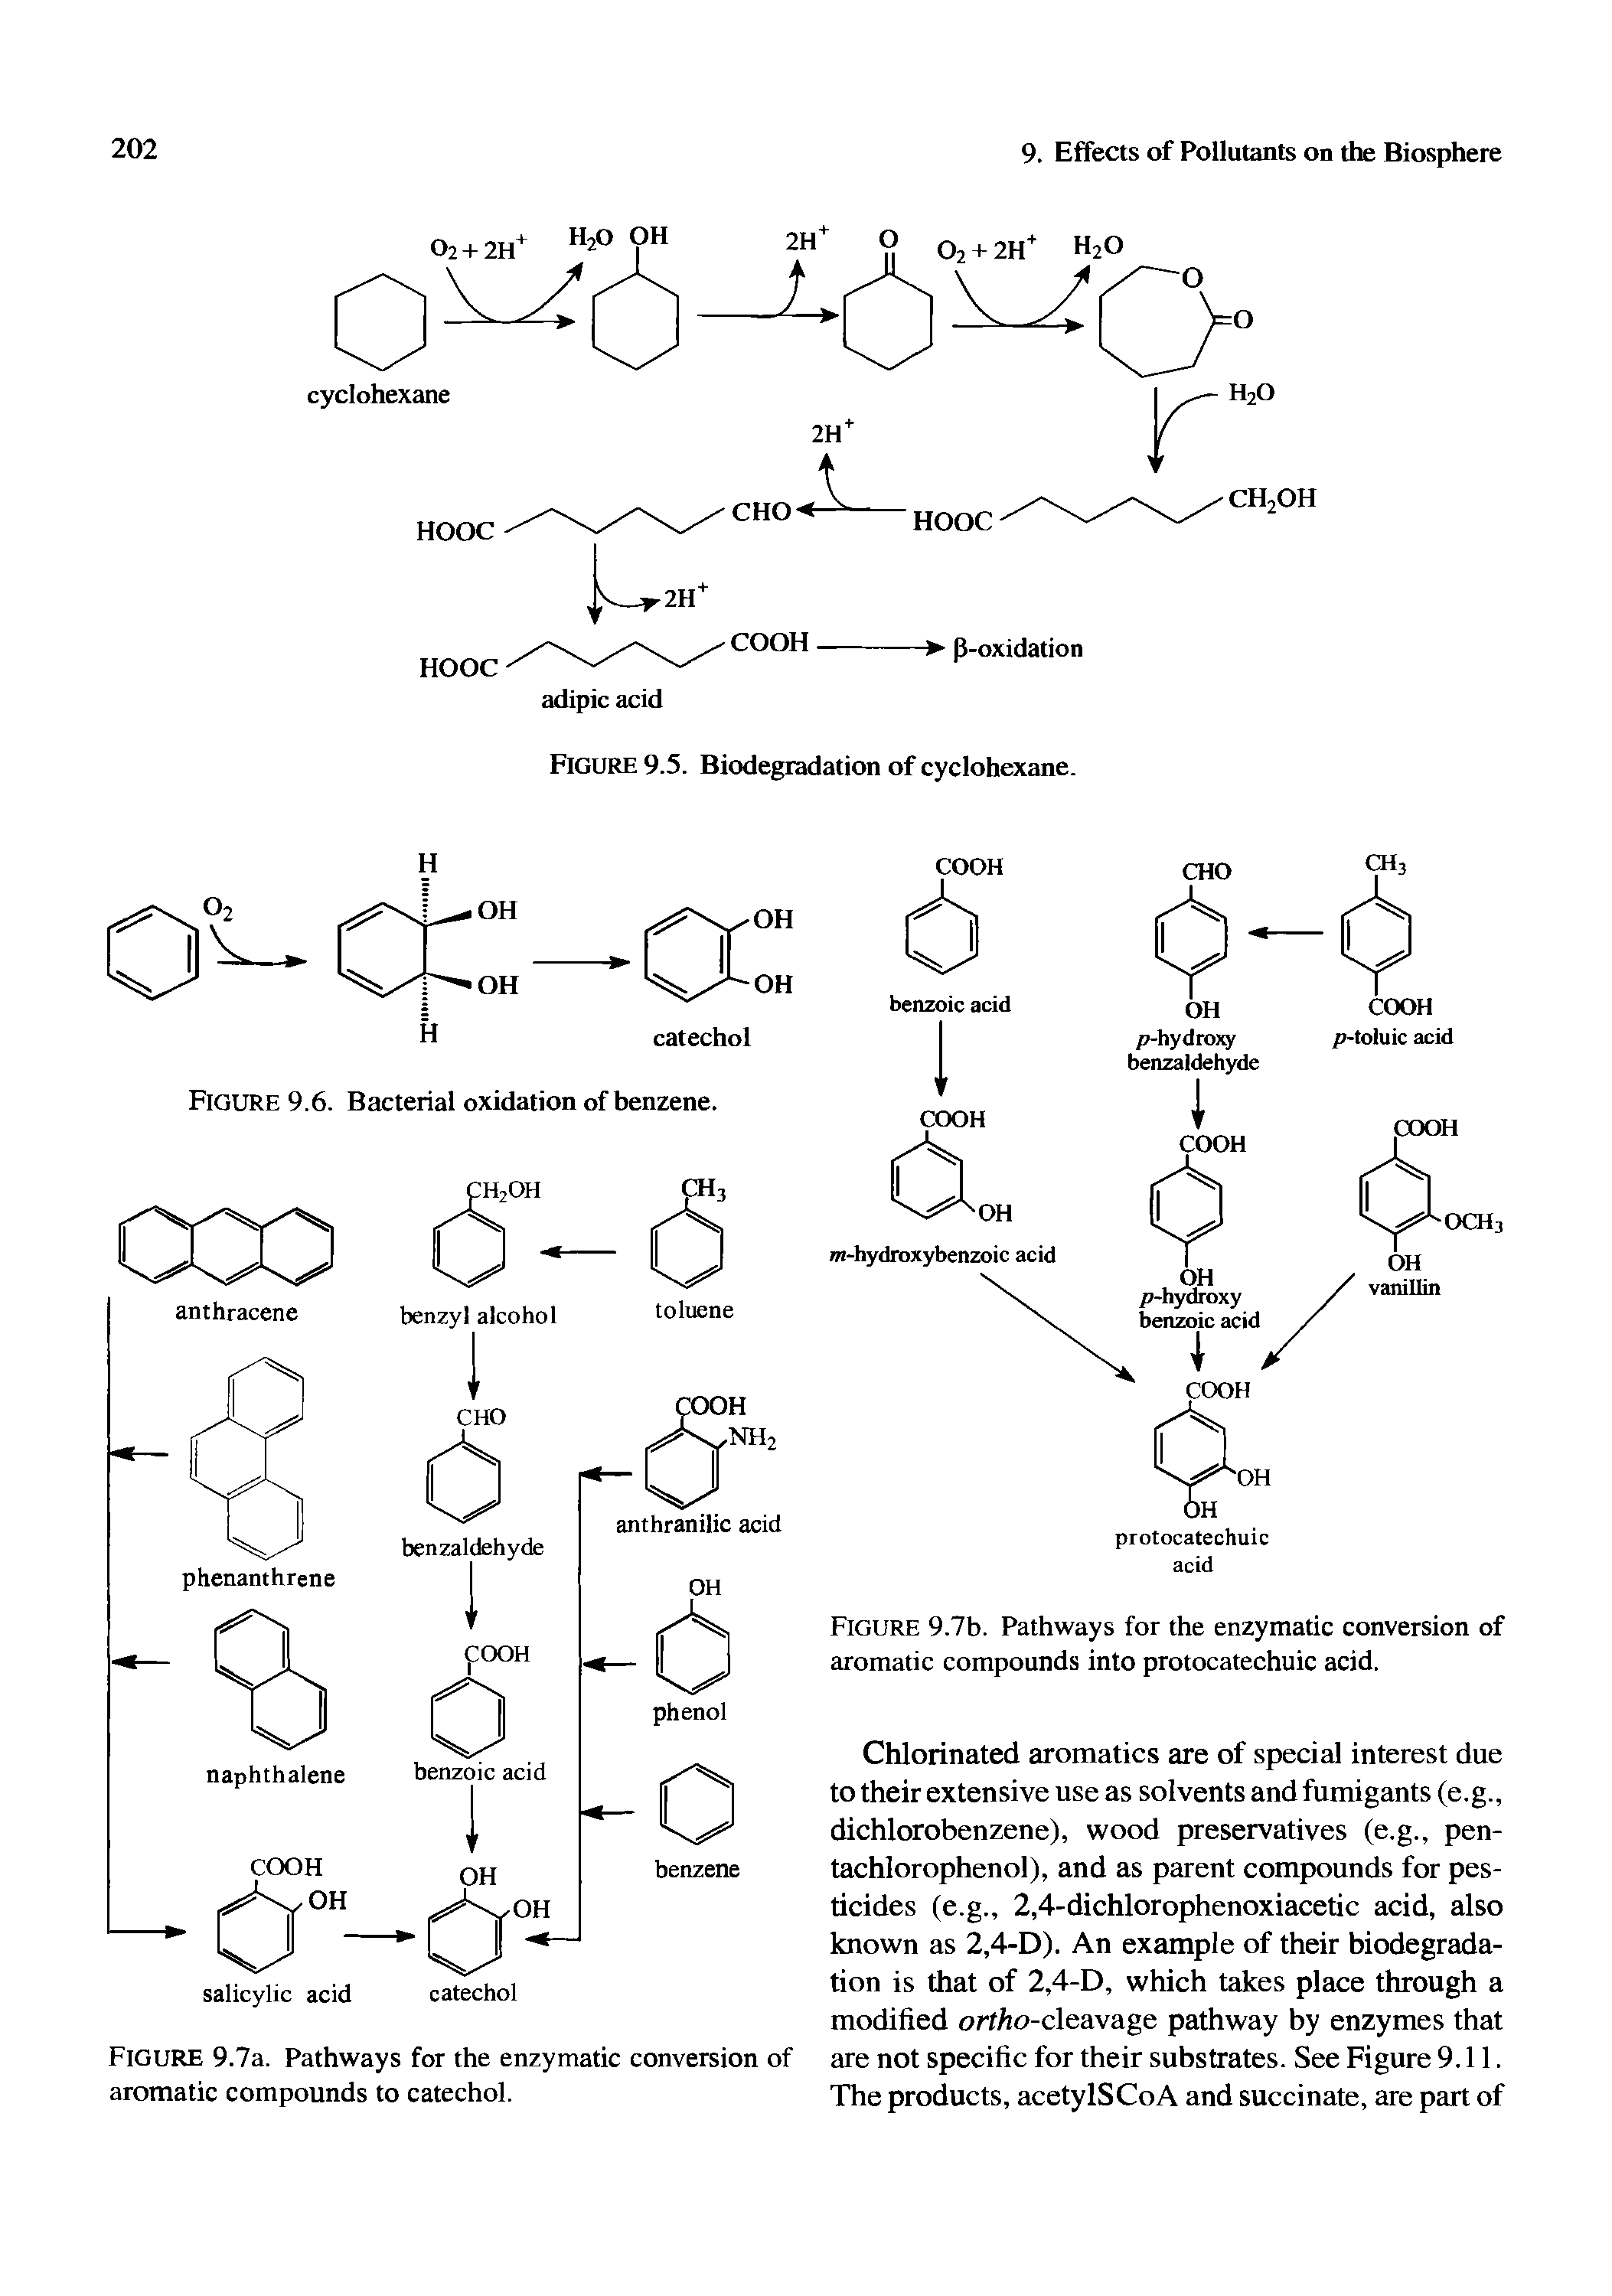 Figure 9.7b. Pathways for the enzymatic conversion of aromatic compounds into protocatechuic acid.